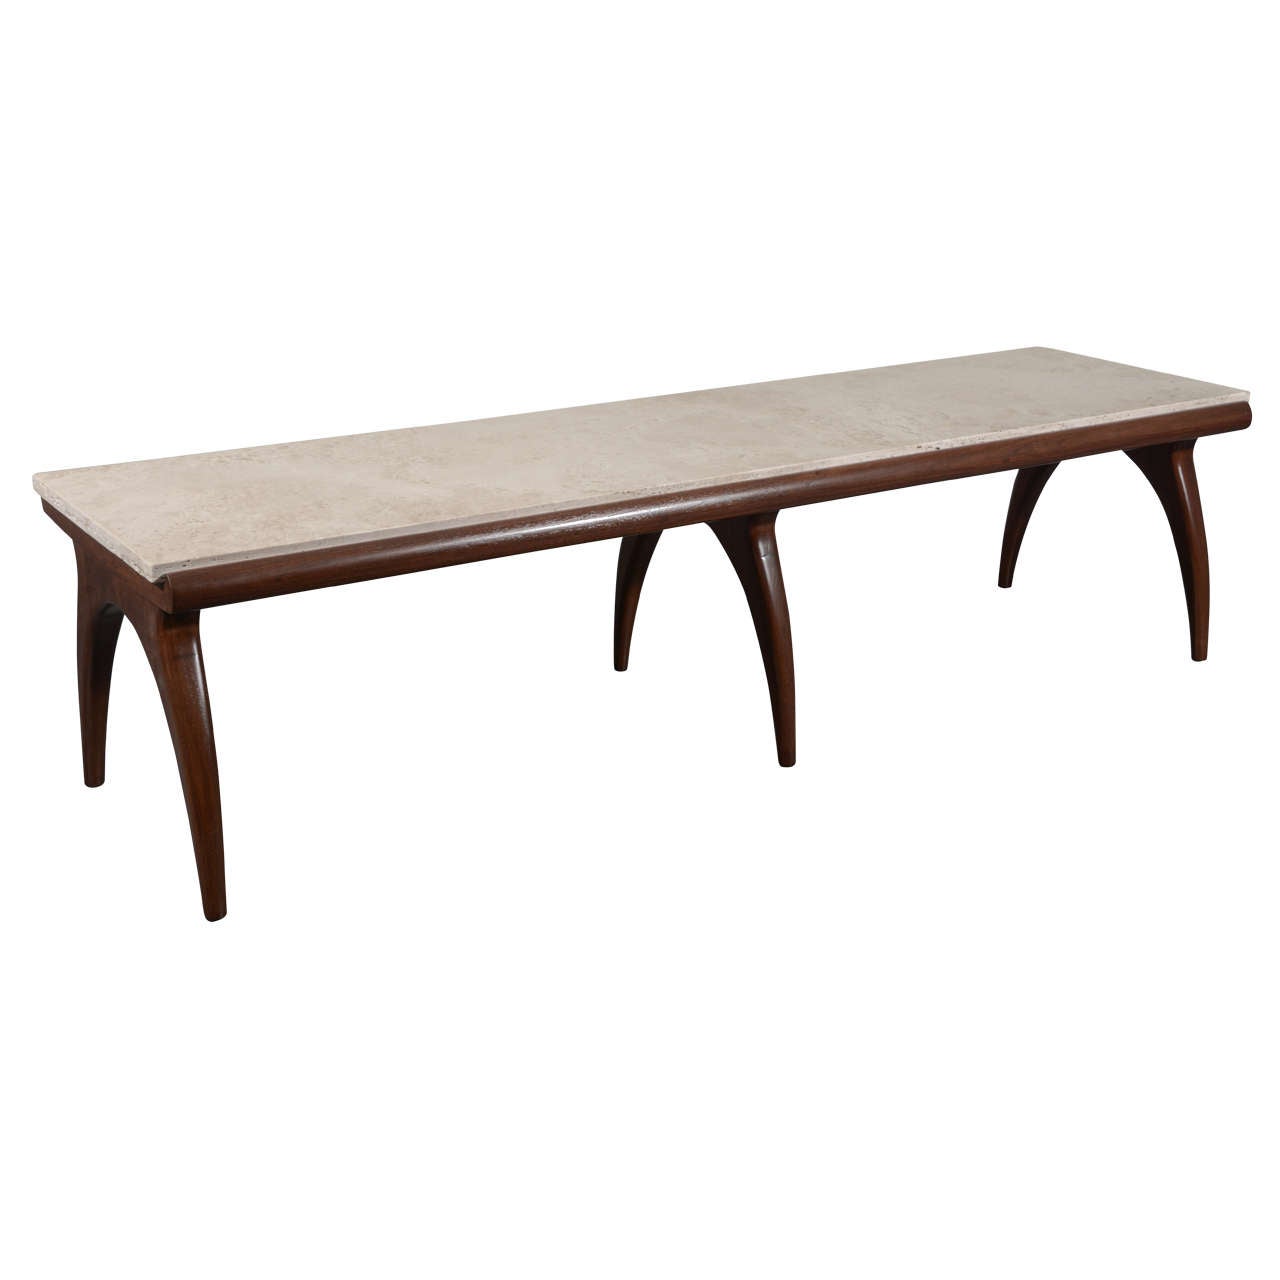 Bertha Schaefer for M. Singer and Sons Coffee Table